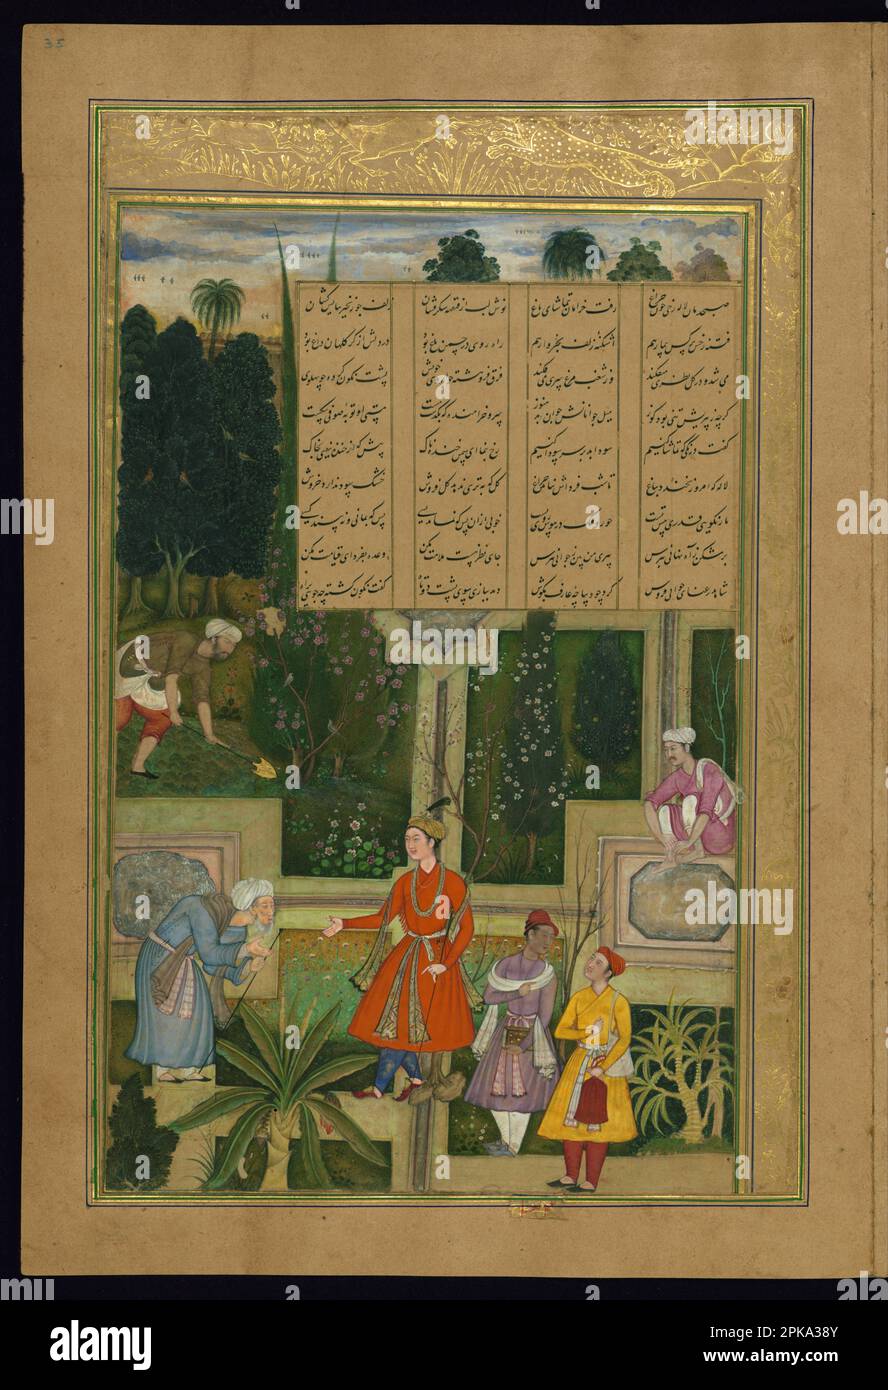 An Old Sufi Laments His Lost Youth 1597-1598 (Mughal) by Amir Khusraw Dihlavi Stock Photo